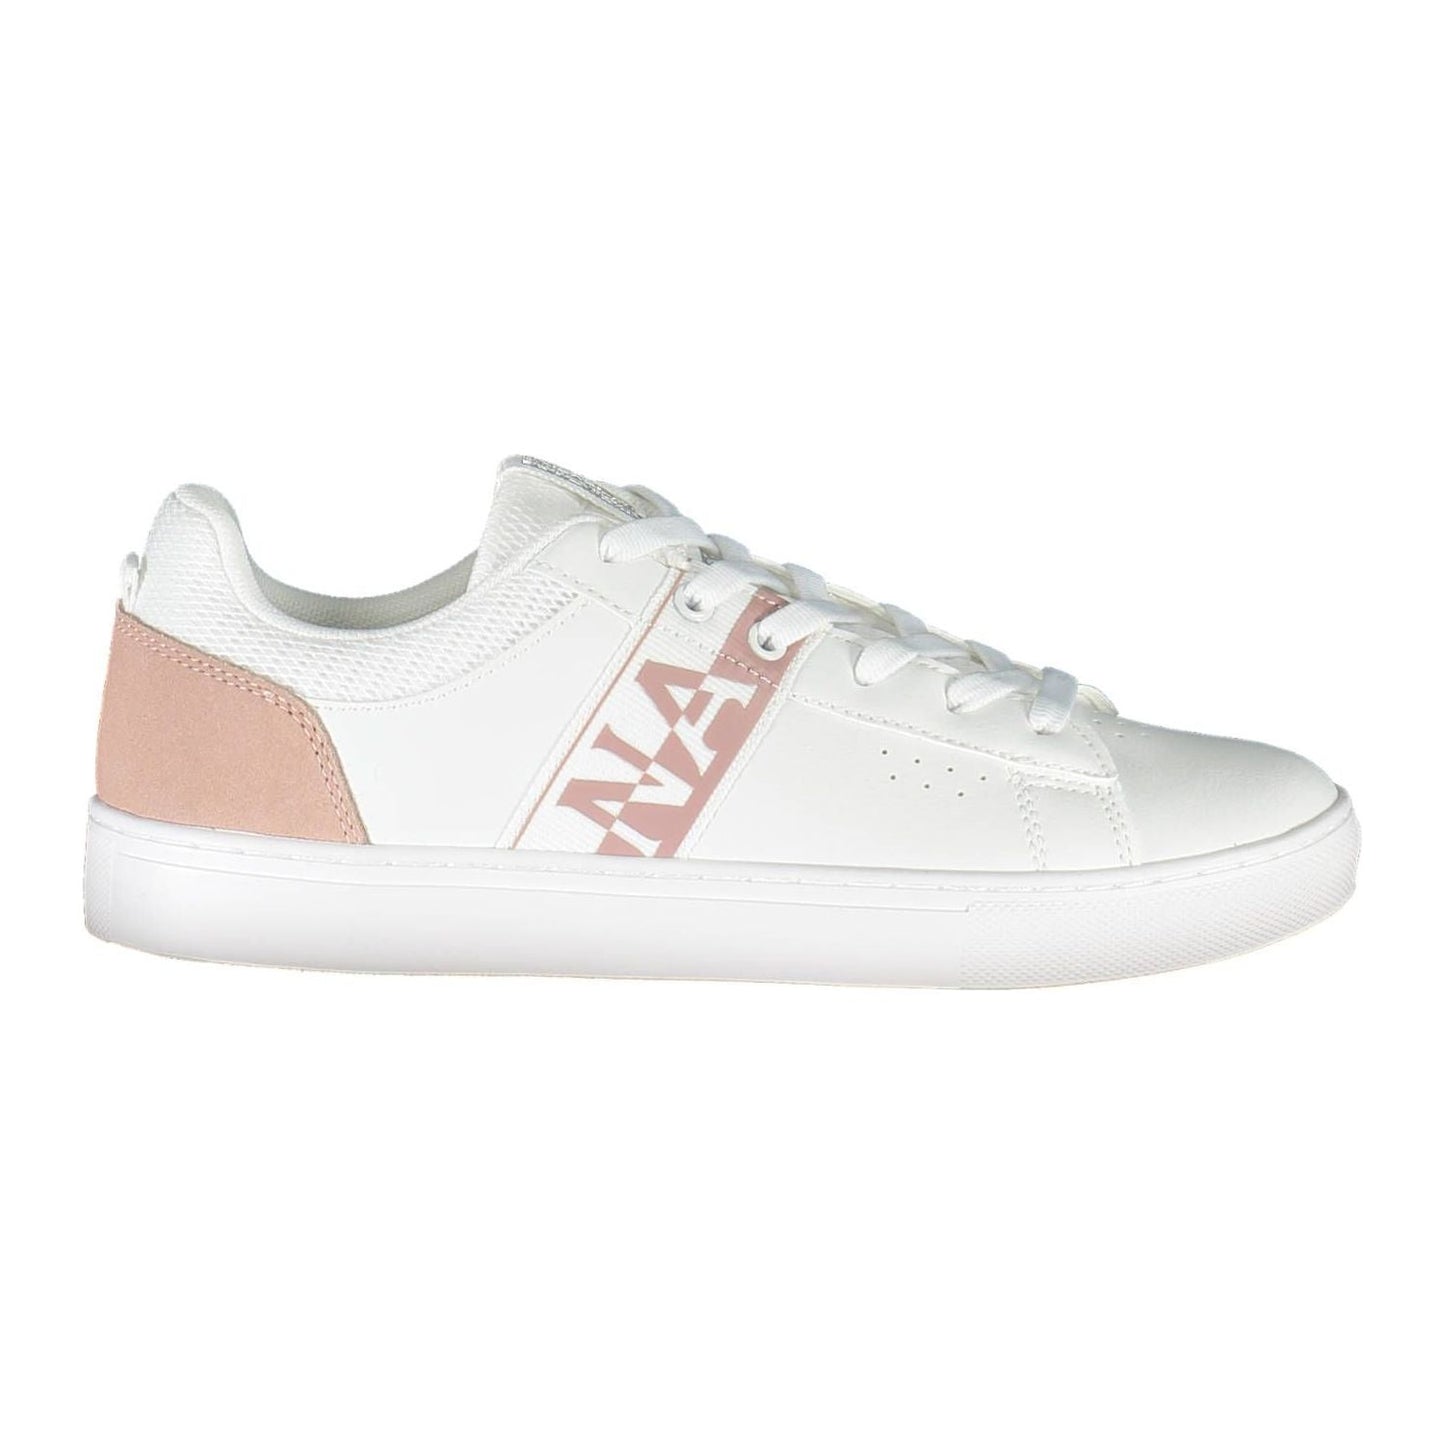 Napapijri Elevated White Sneakers with Contrasting Accents elevated-white-sneakers-with-contrasting-accents